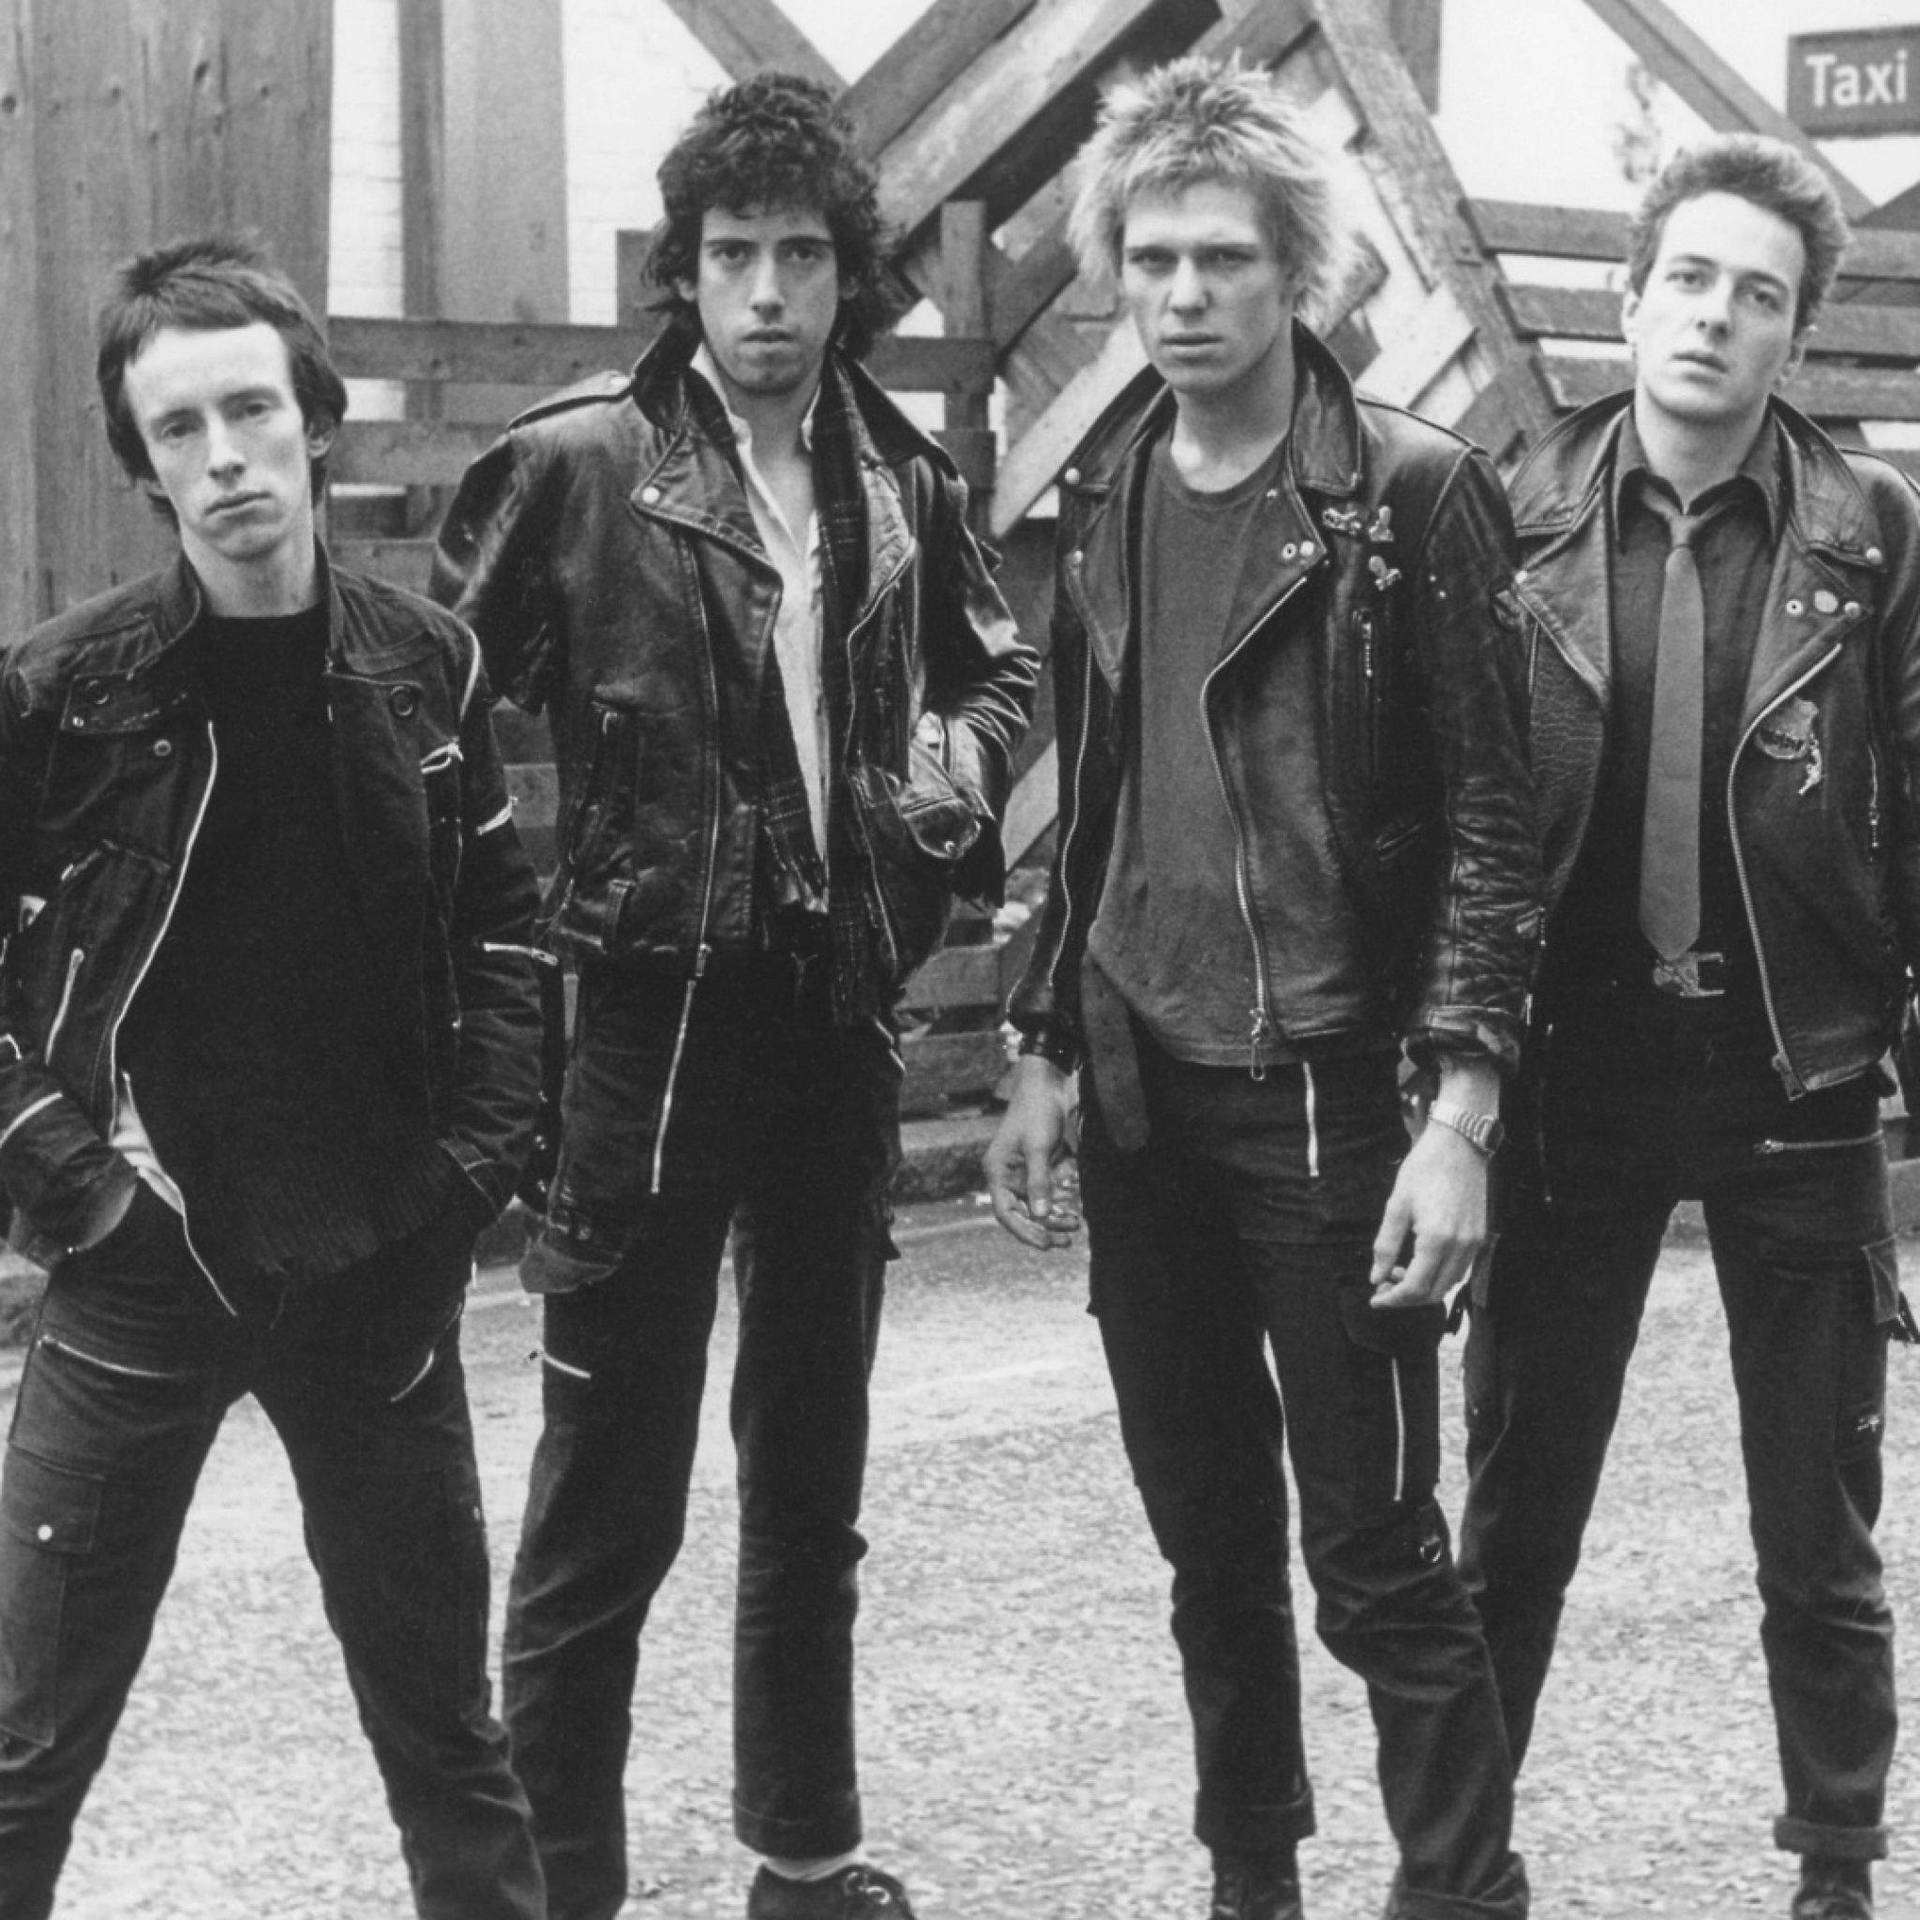 English Rock Band The Clash Posing For The 1979 Photoshoot